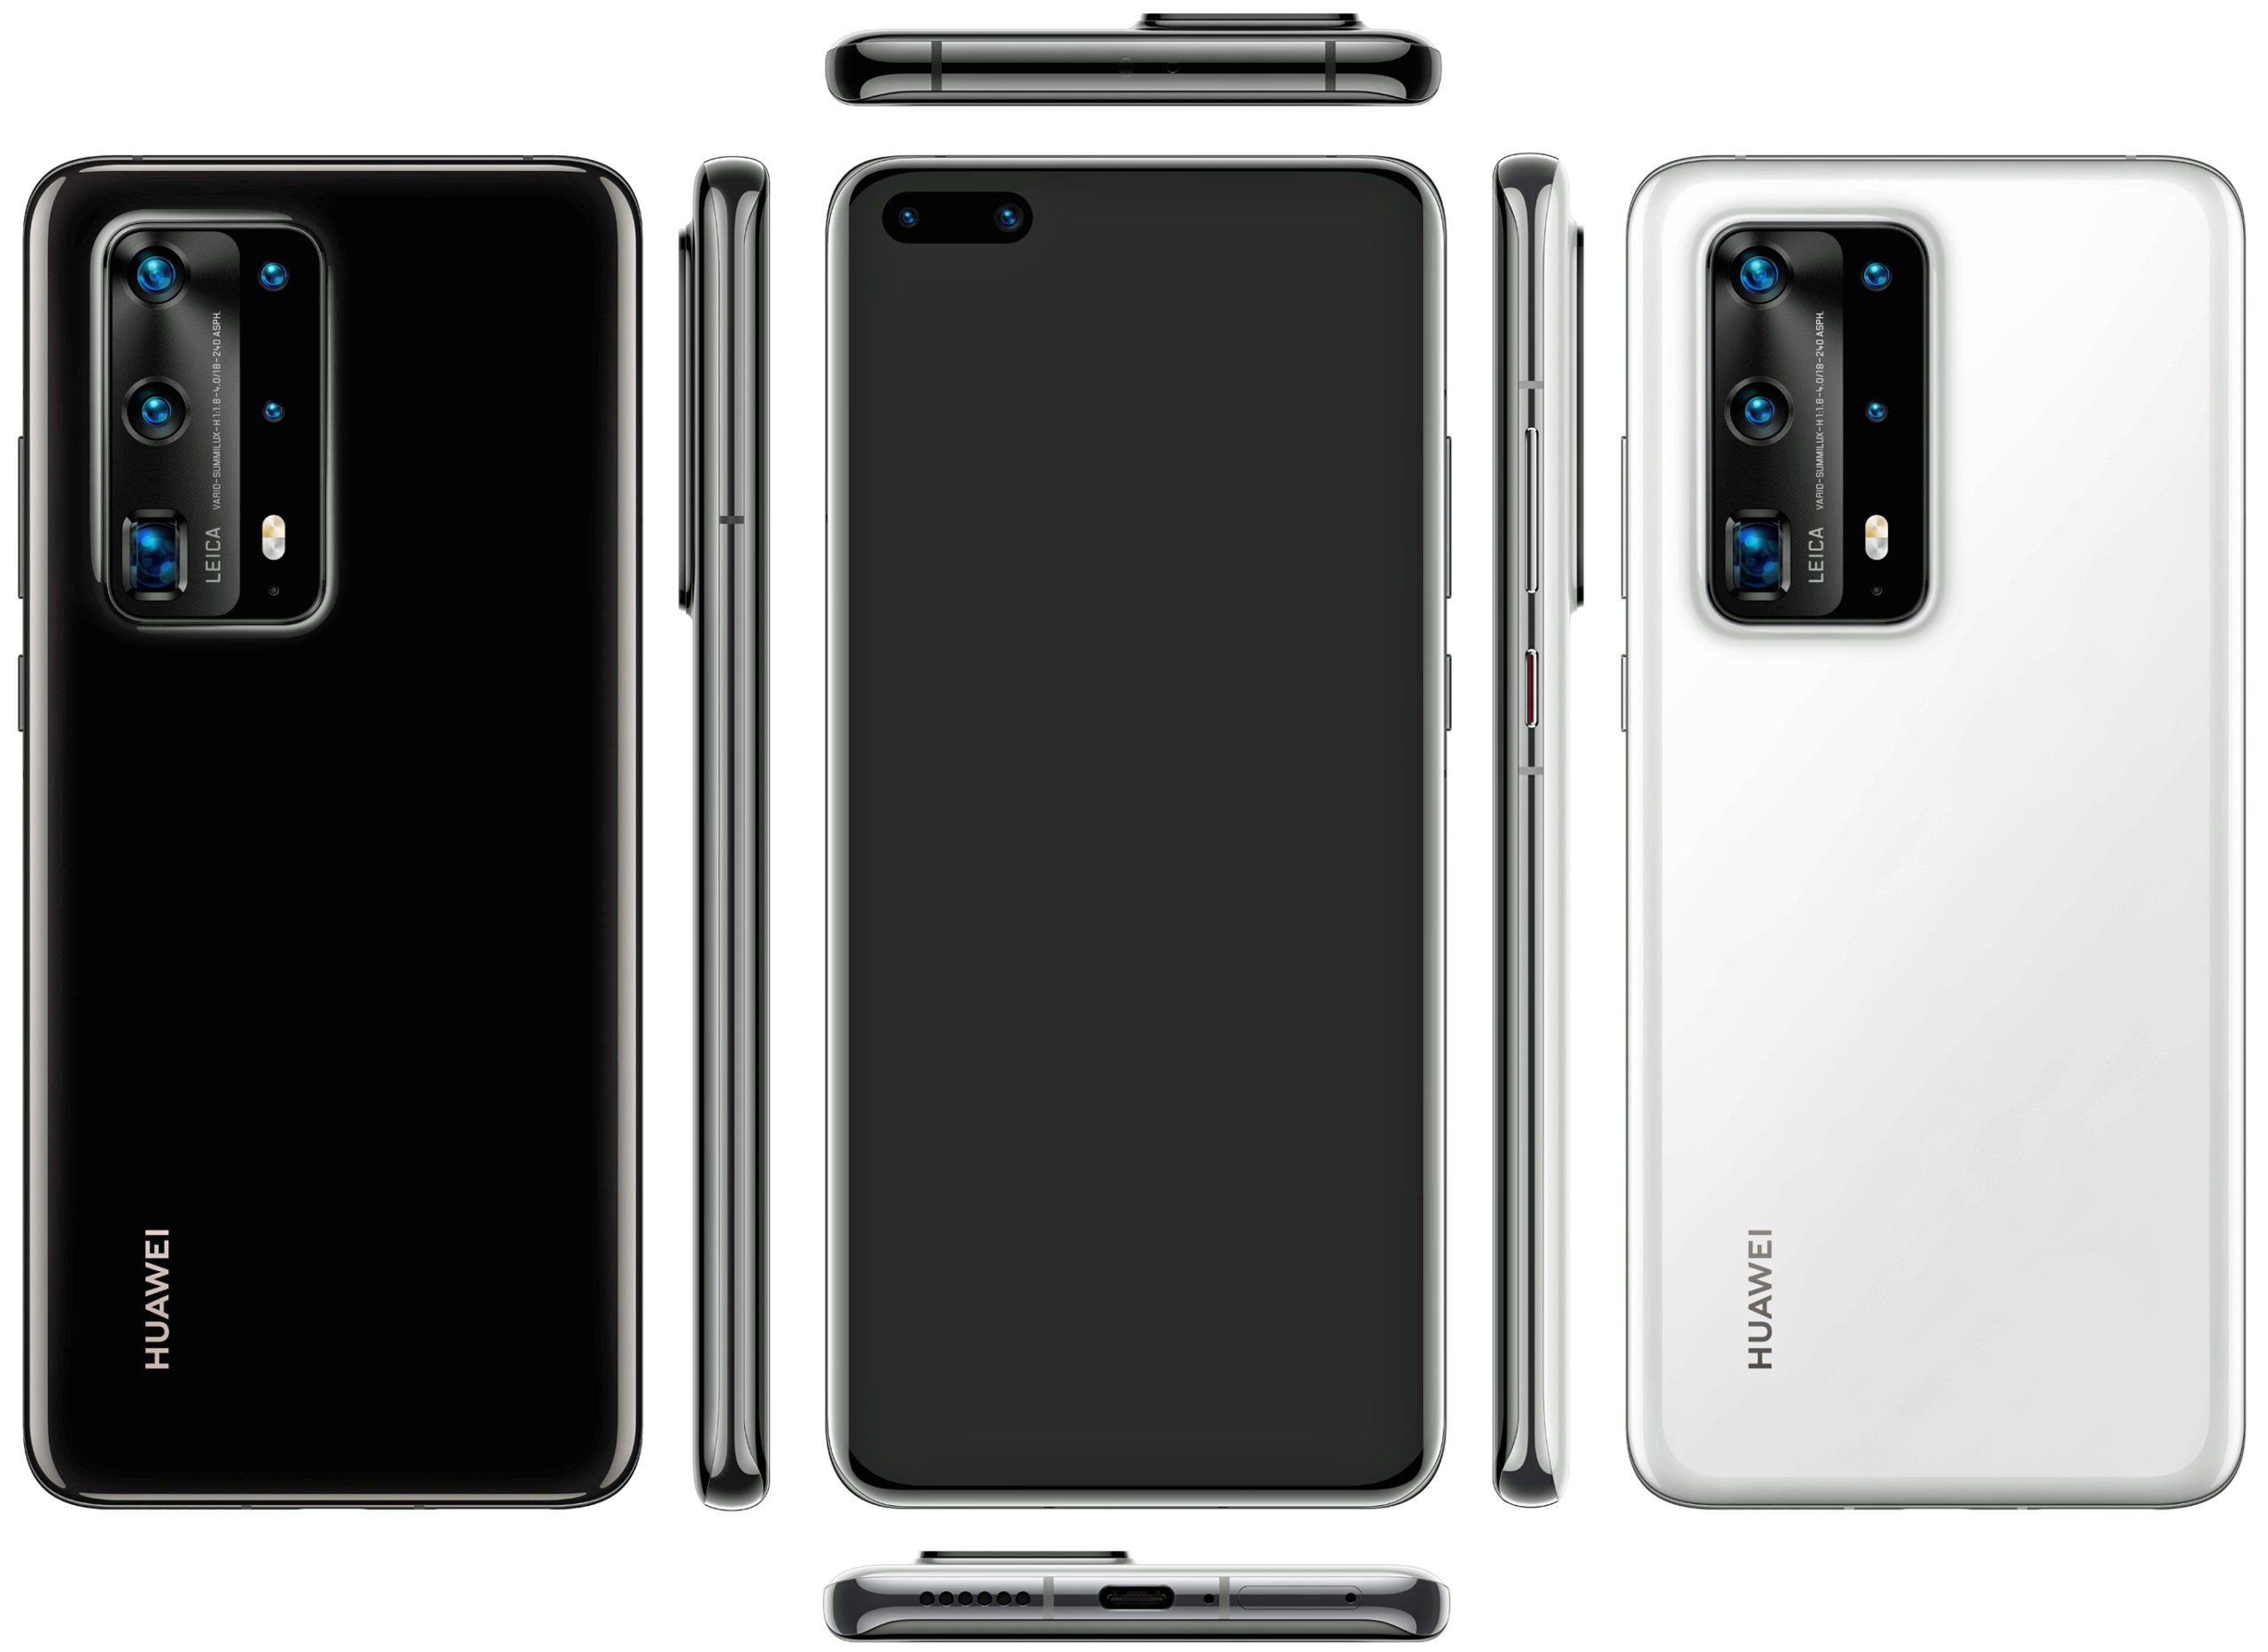 Review of Huawei P40 Pro Premium smartphone with key features